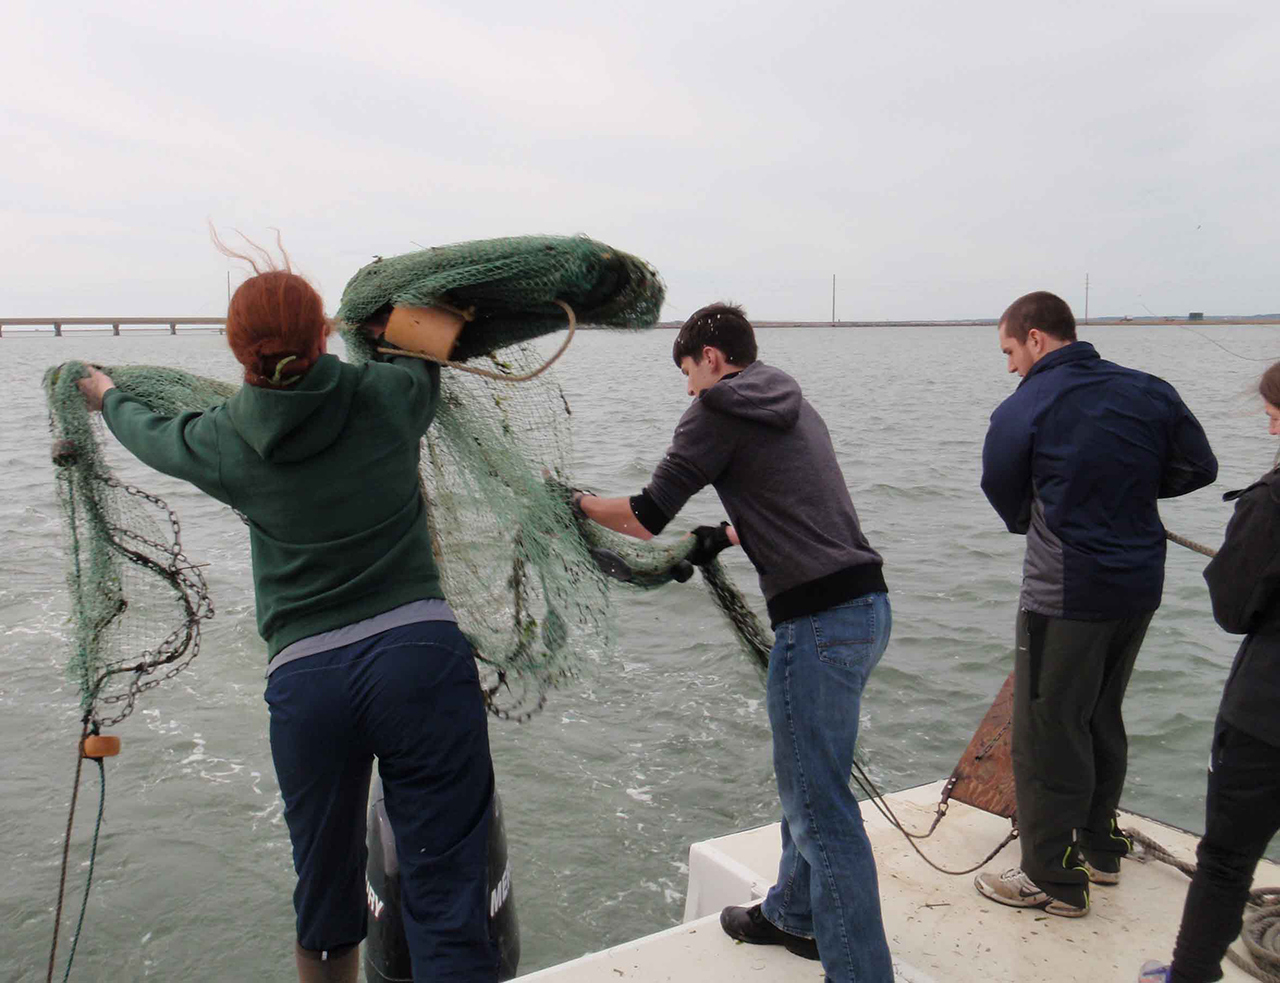 Students on a boat throwing a large fishing net over the side. 